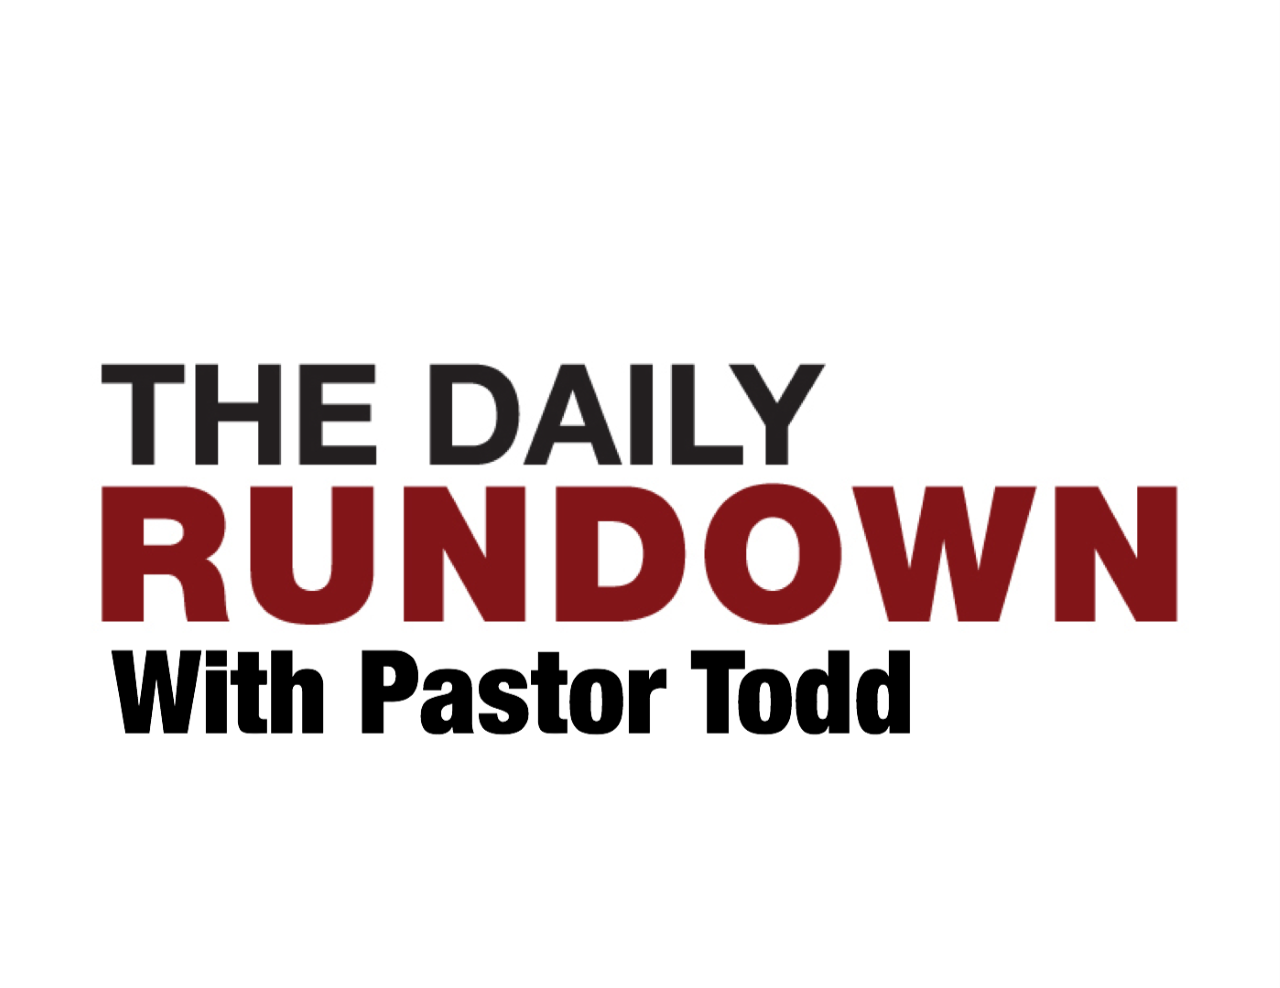 Remnant News: Daily Rundown with Pastor Todd 7/30/2020